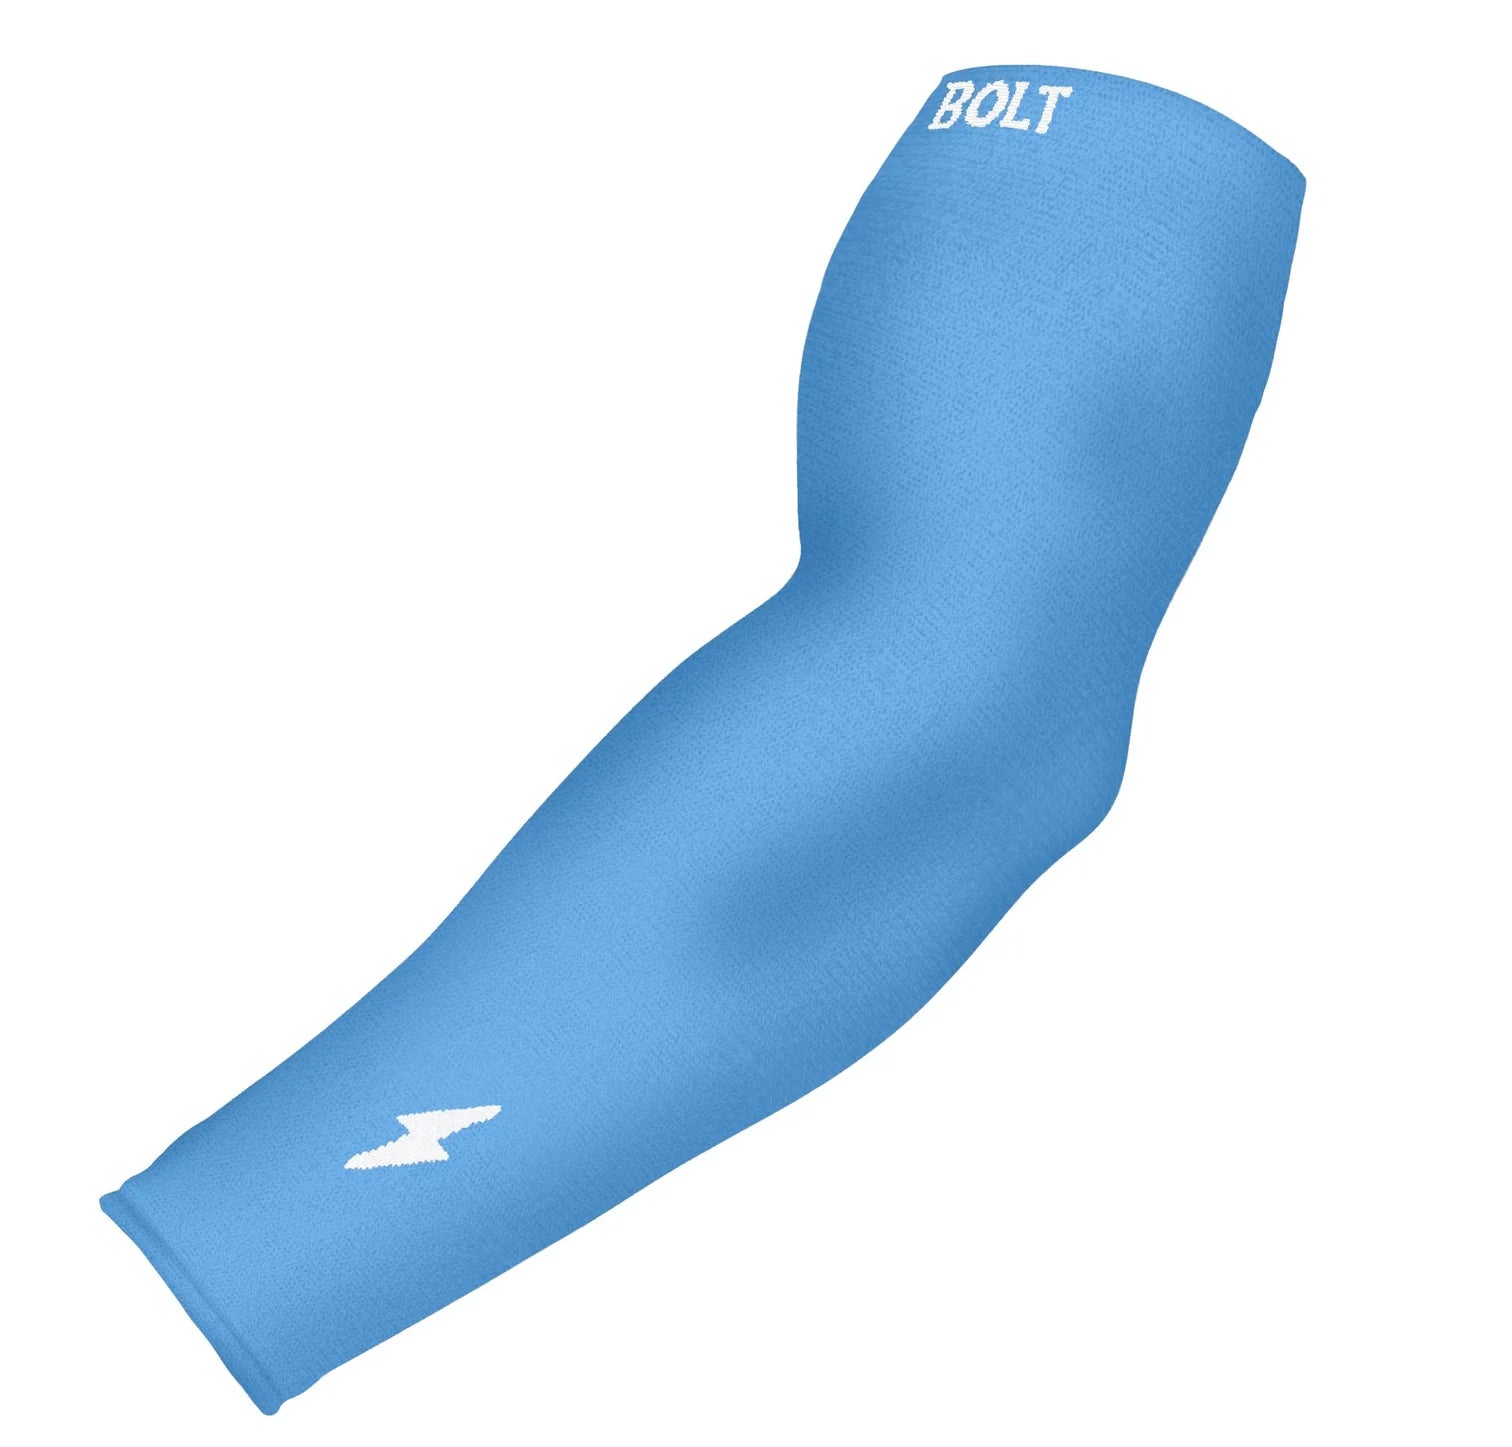 COLO Pro Volleyball Arm Sleeves Yellow Blue - Unisex